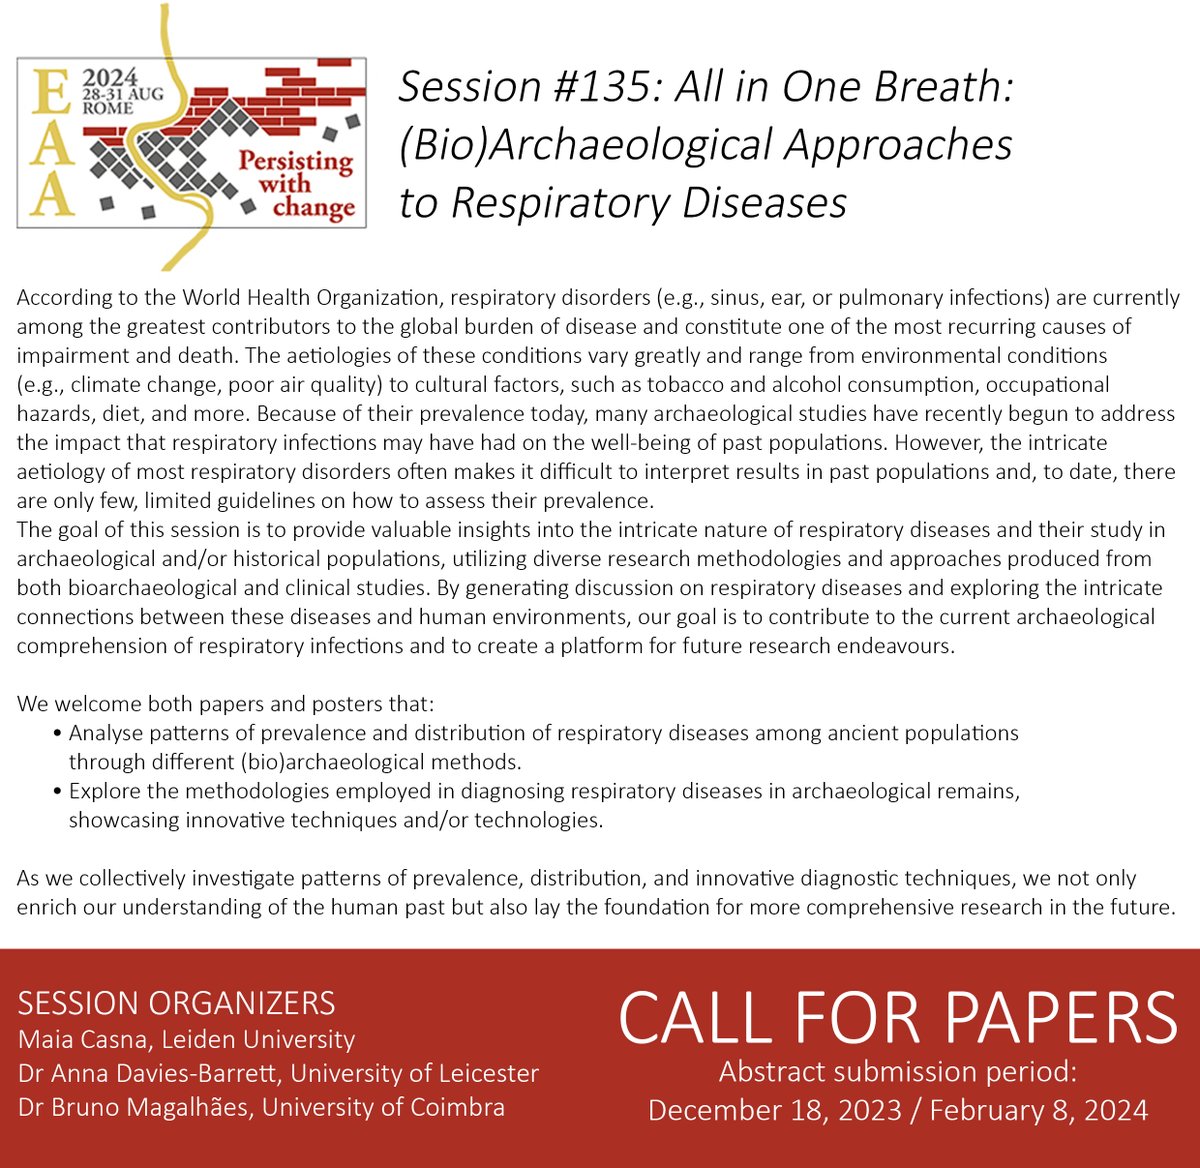 📢Call for Abstracts! 
Join our groundbreaking session on the #Archaeology of #RespiratoryDisease at #EAA2024 in Rome! 🫁👃

🔍We are seeking papers exploring patterns of disease and/or discussing methodological approaches

🗒️ Submissions opening Dec 18! 
Info at @archaeologyEAA